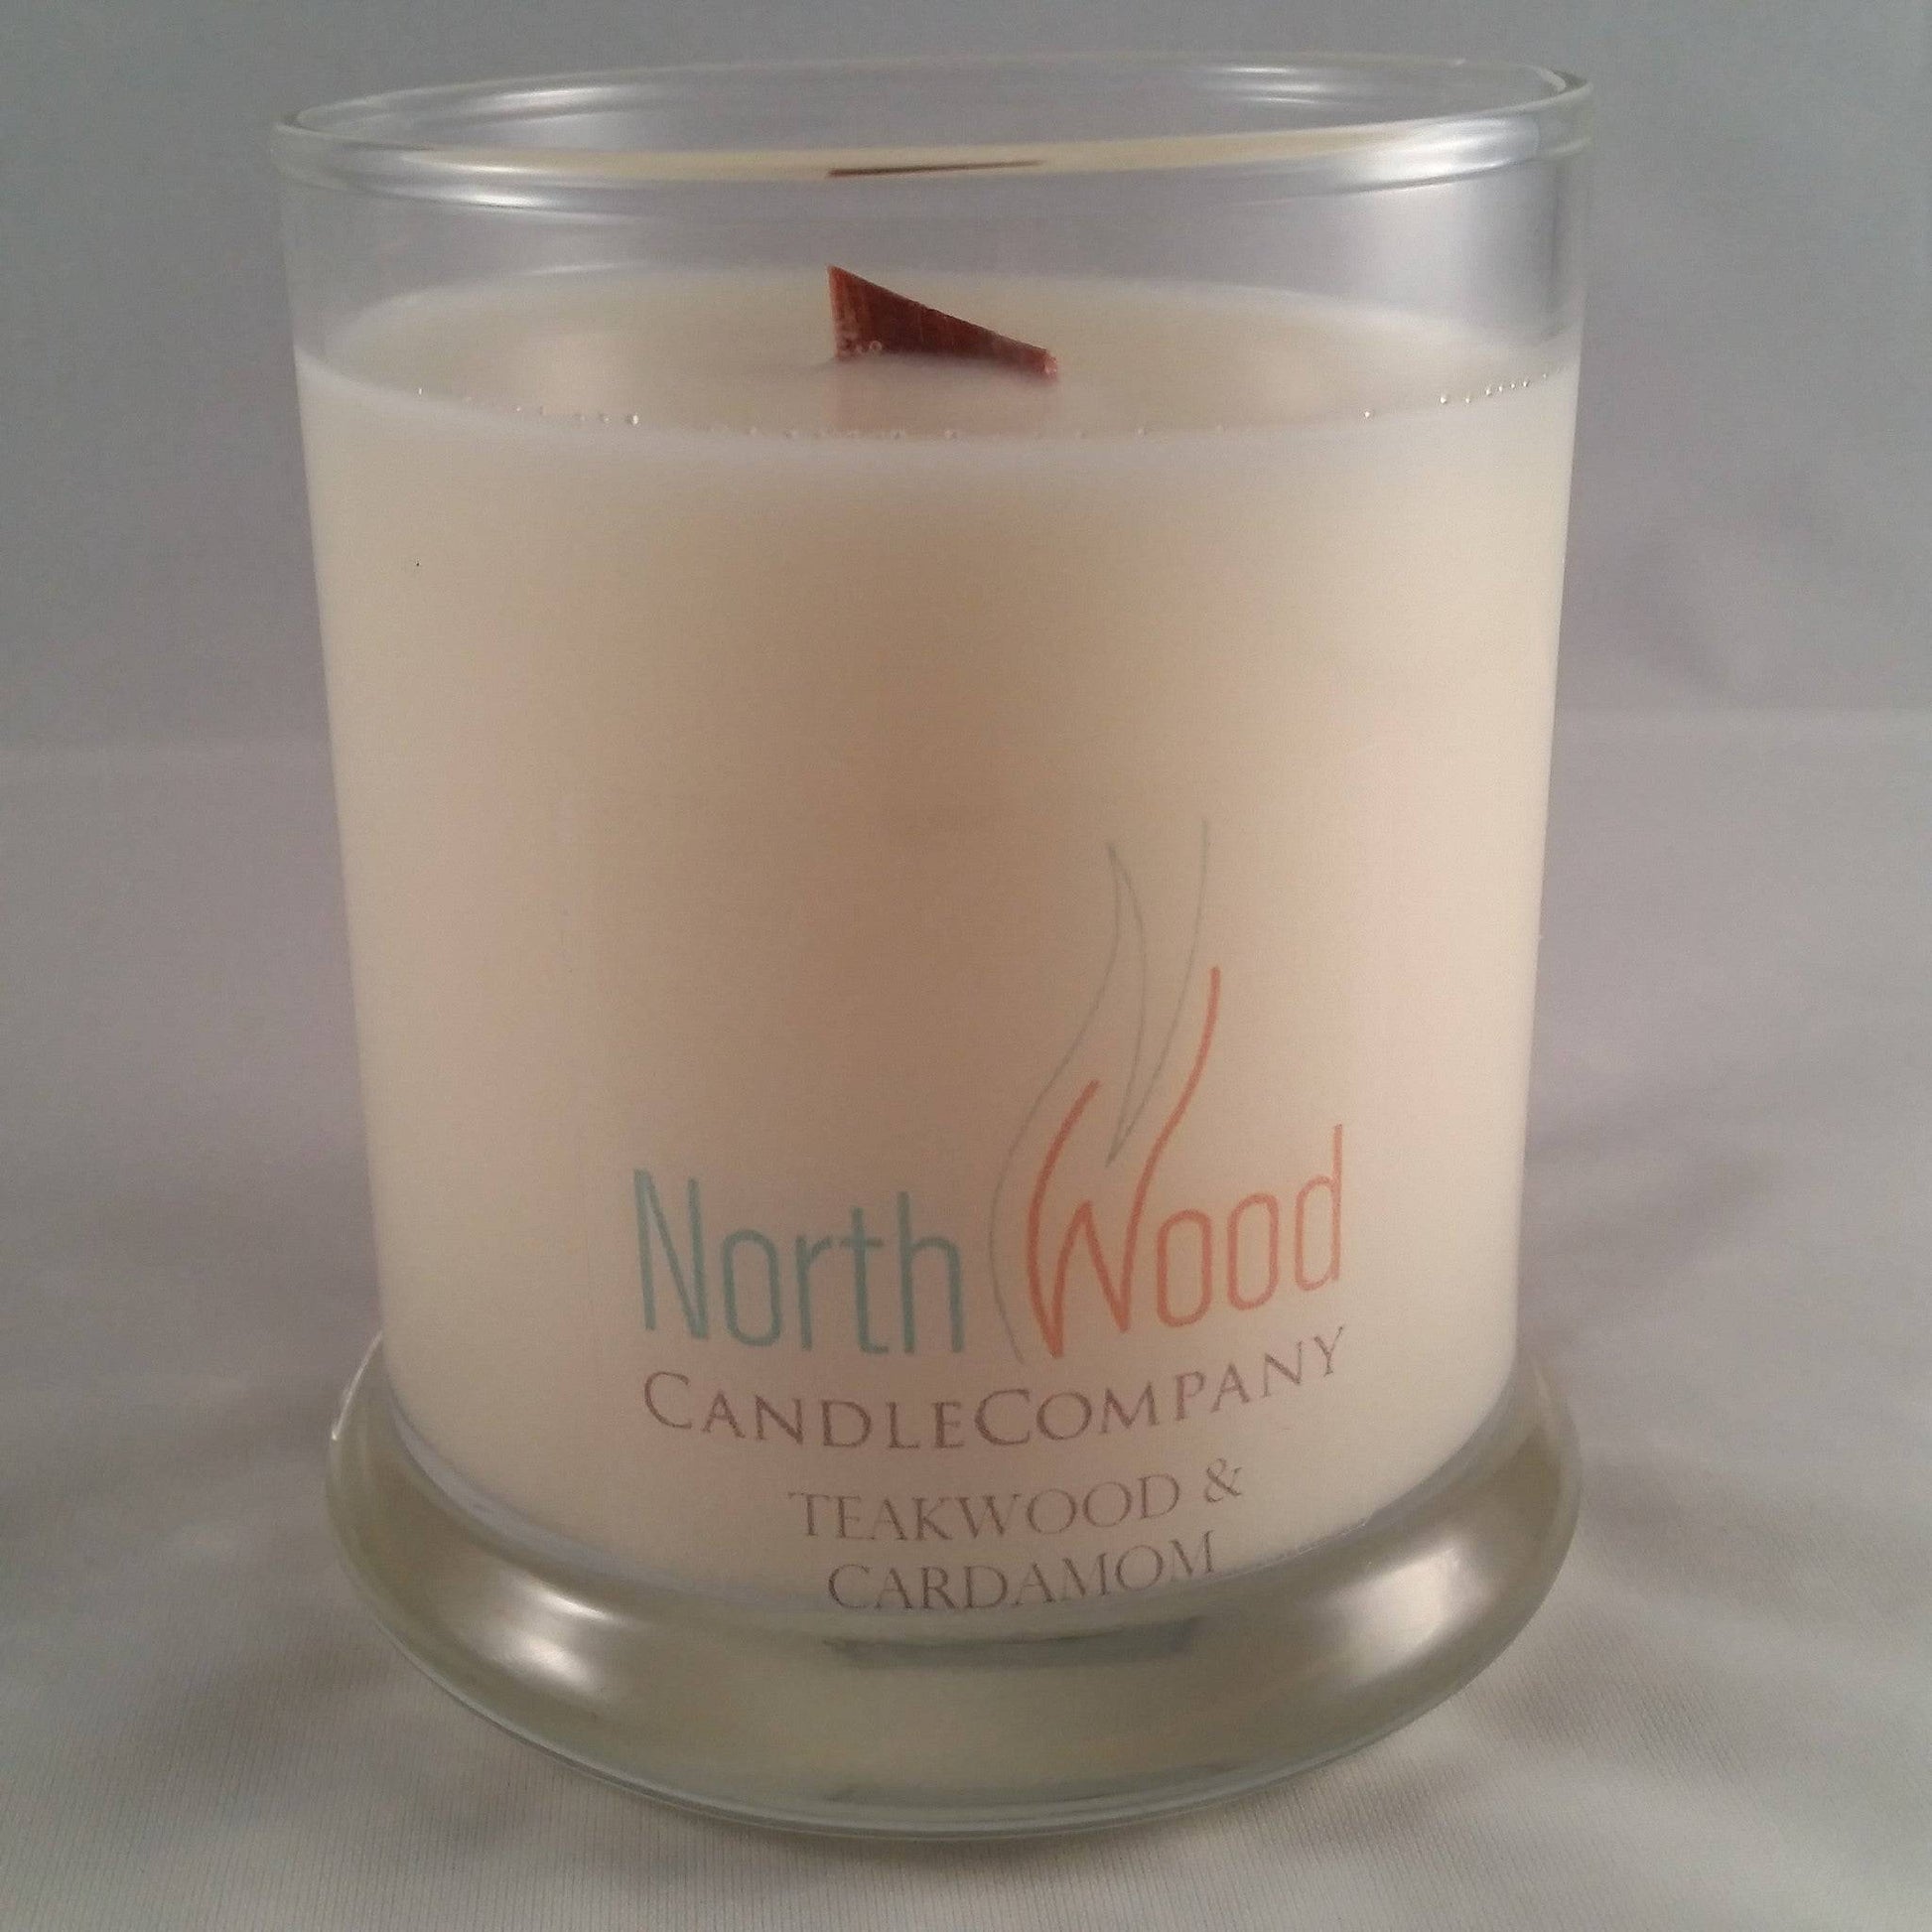 Candle with a wooden wick